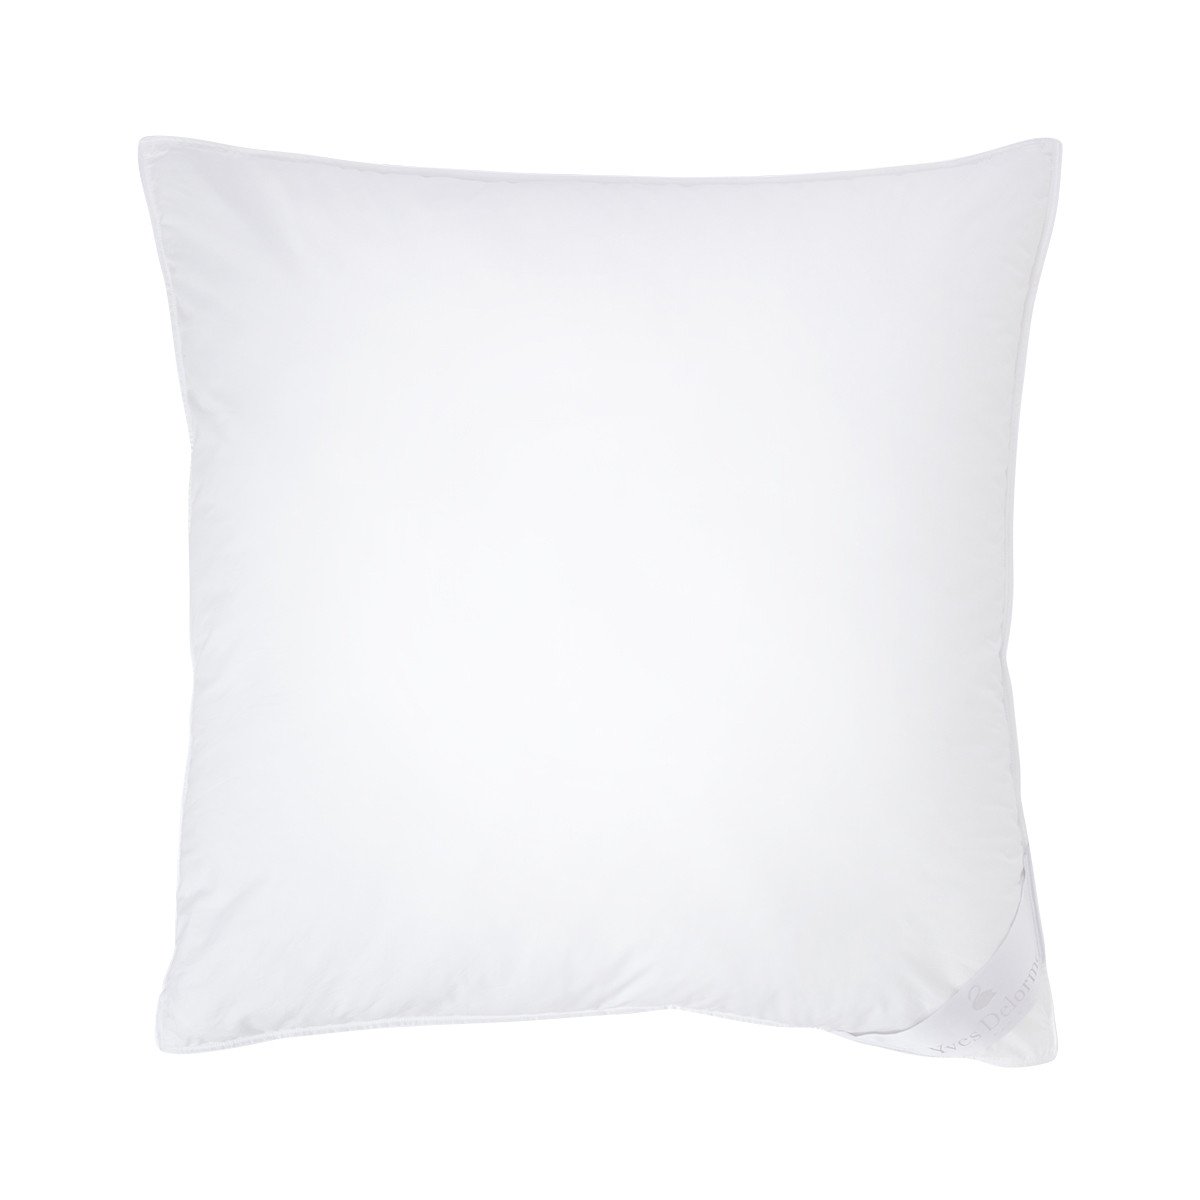 Actuel Anti Allergy Down Alternative Pillows by Yves Delorme